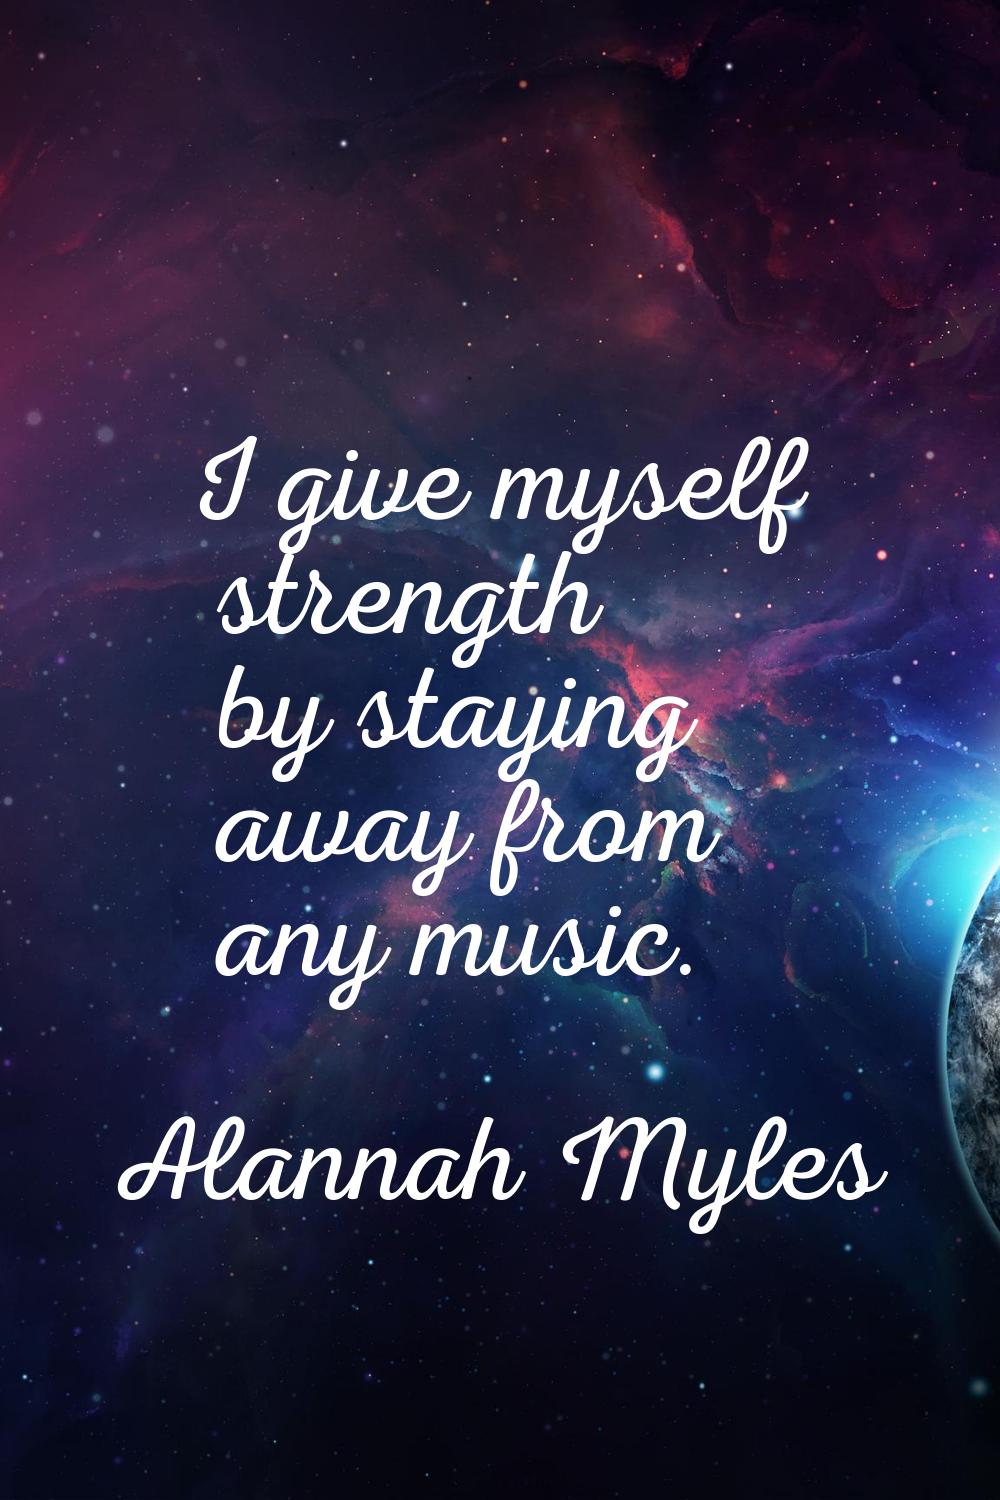 I give myself strength by staying away from any music.